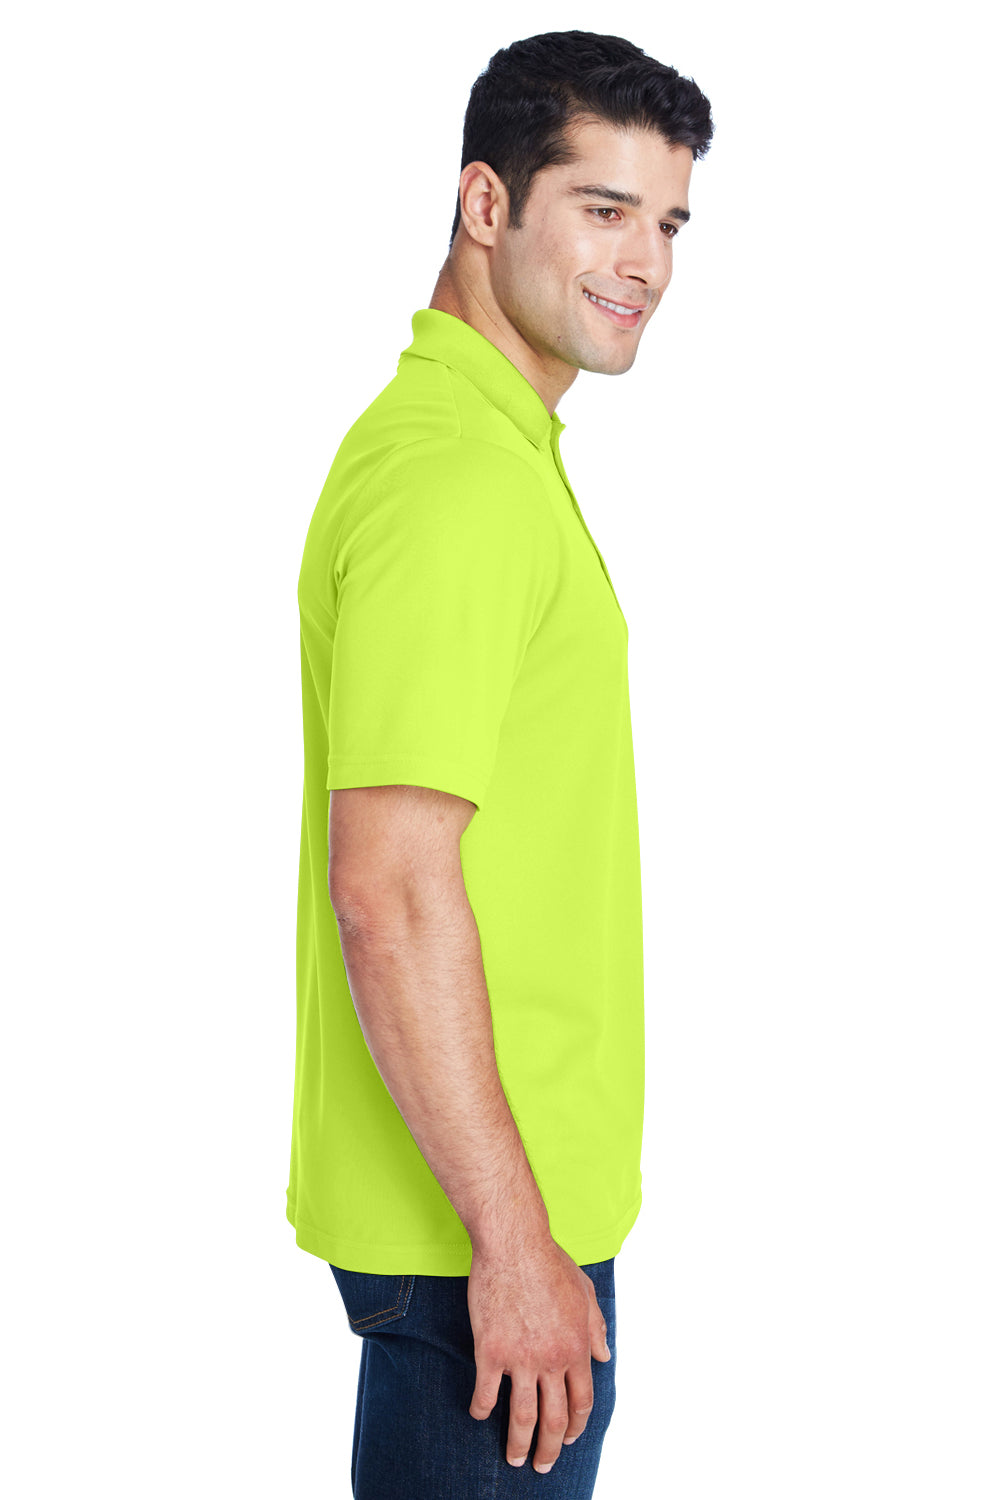 Core 365 88181 Mens Origin Performance Moisture Wicking Short Sleeve Polo Shirt Safety Yellow Side